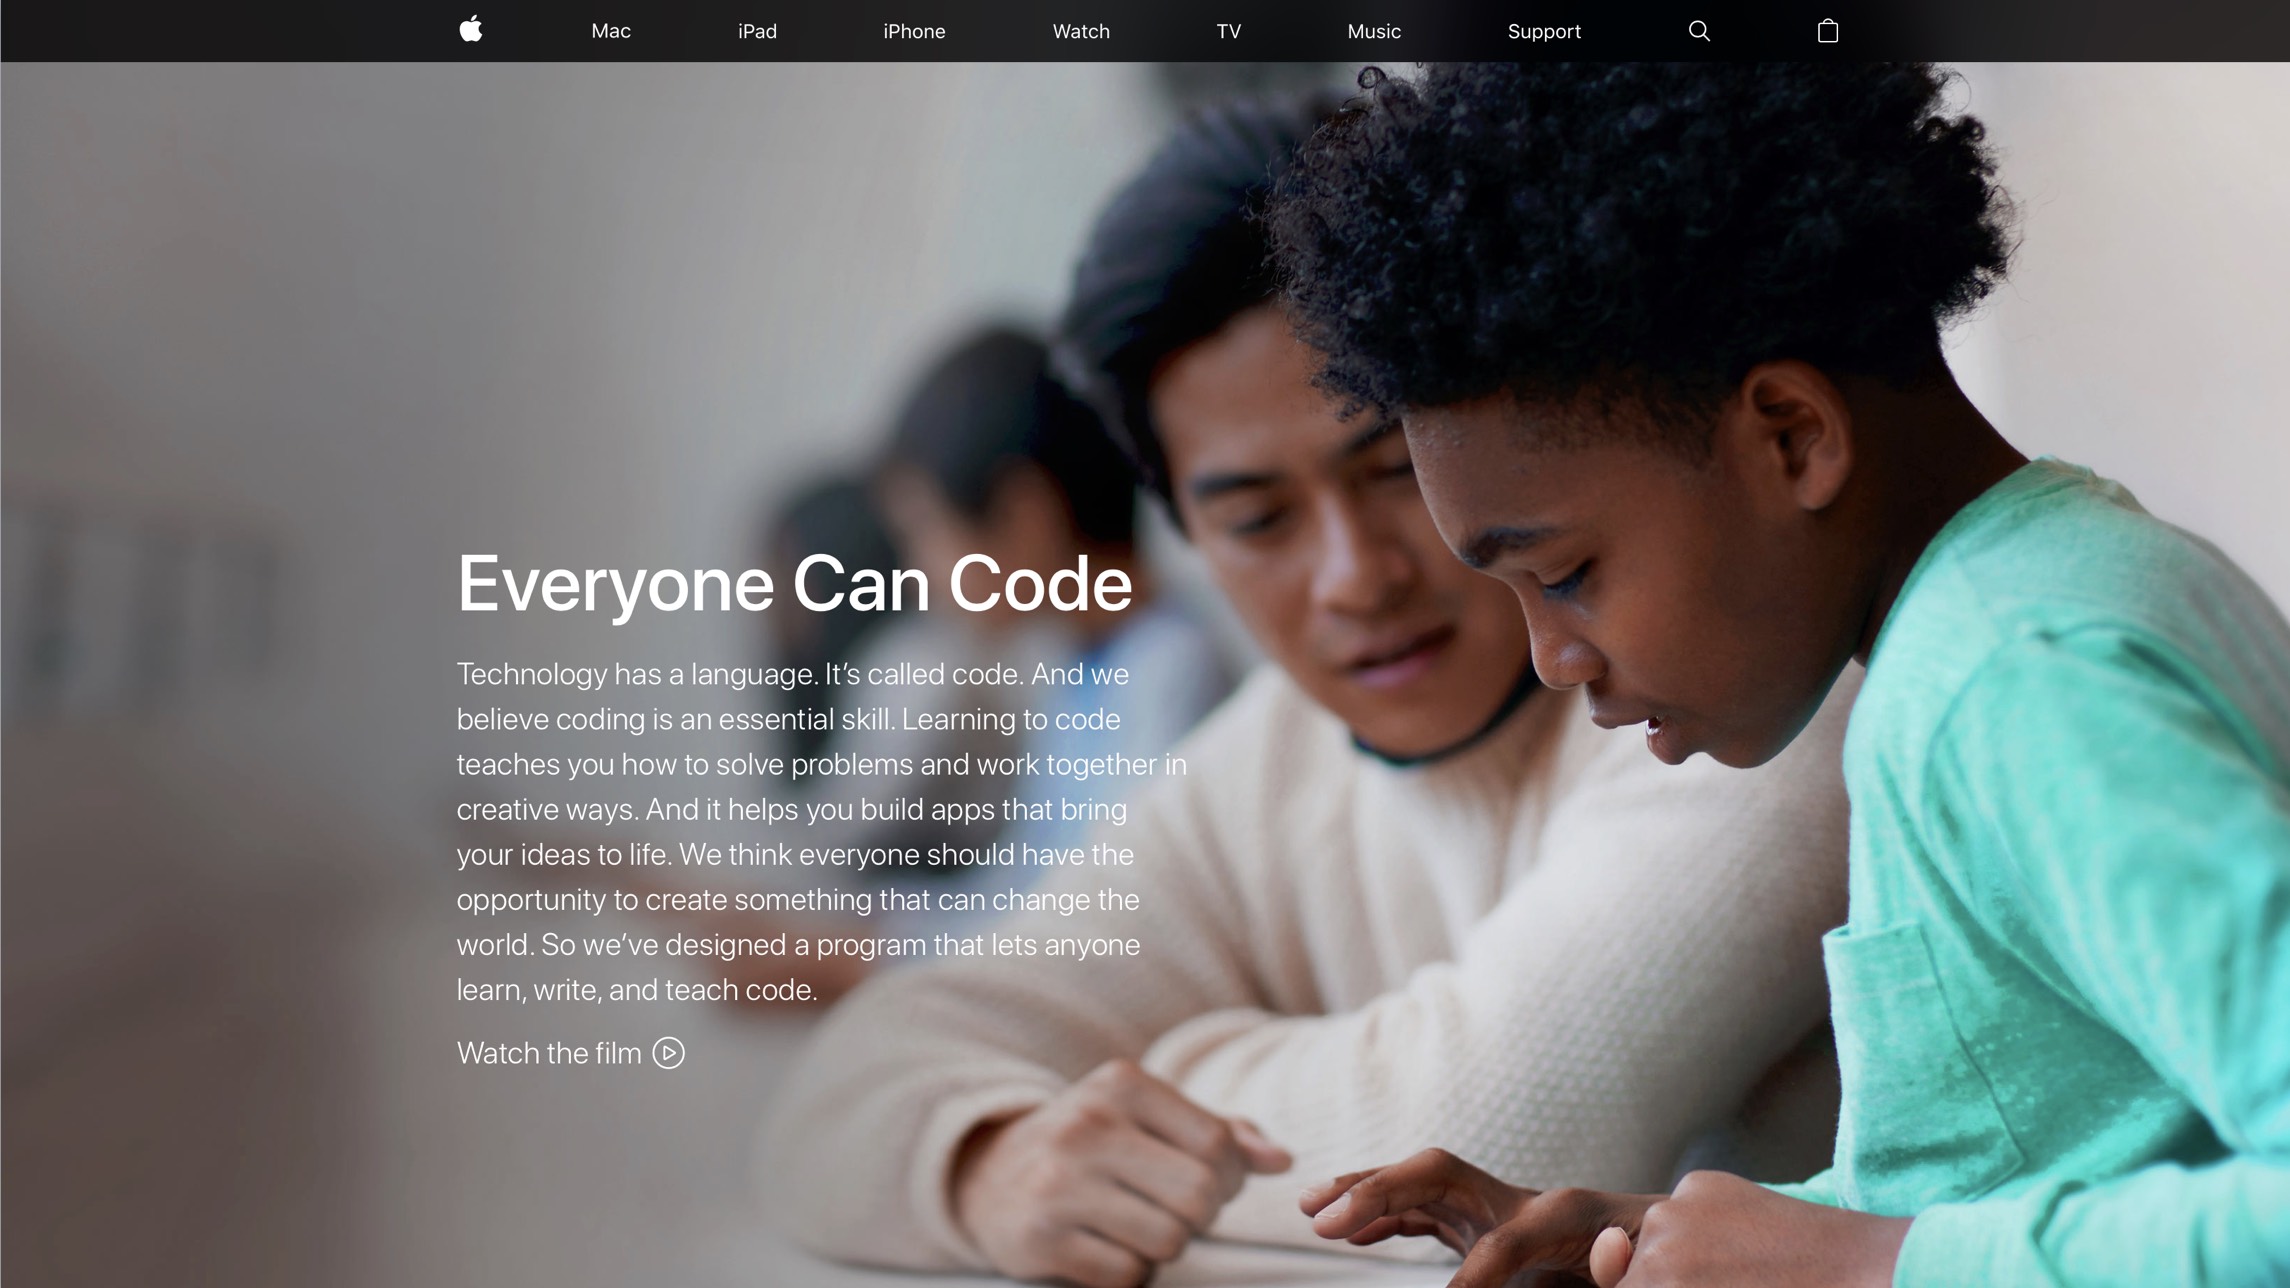 “Everyone Can Code” from Apple